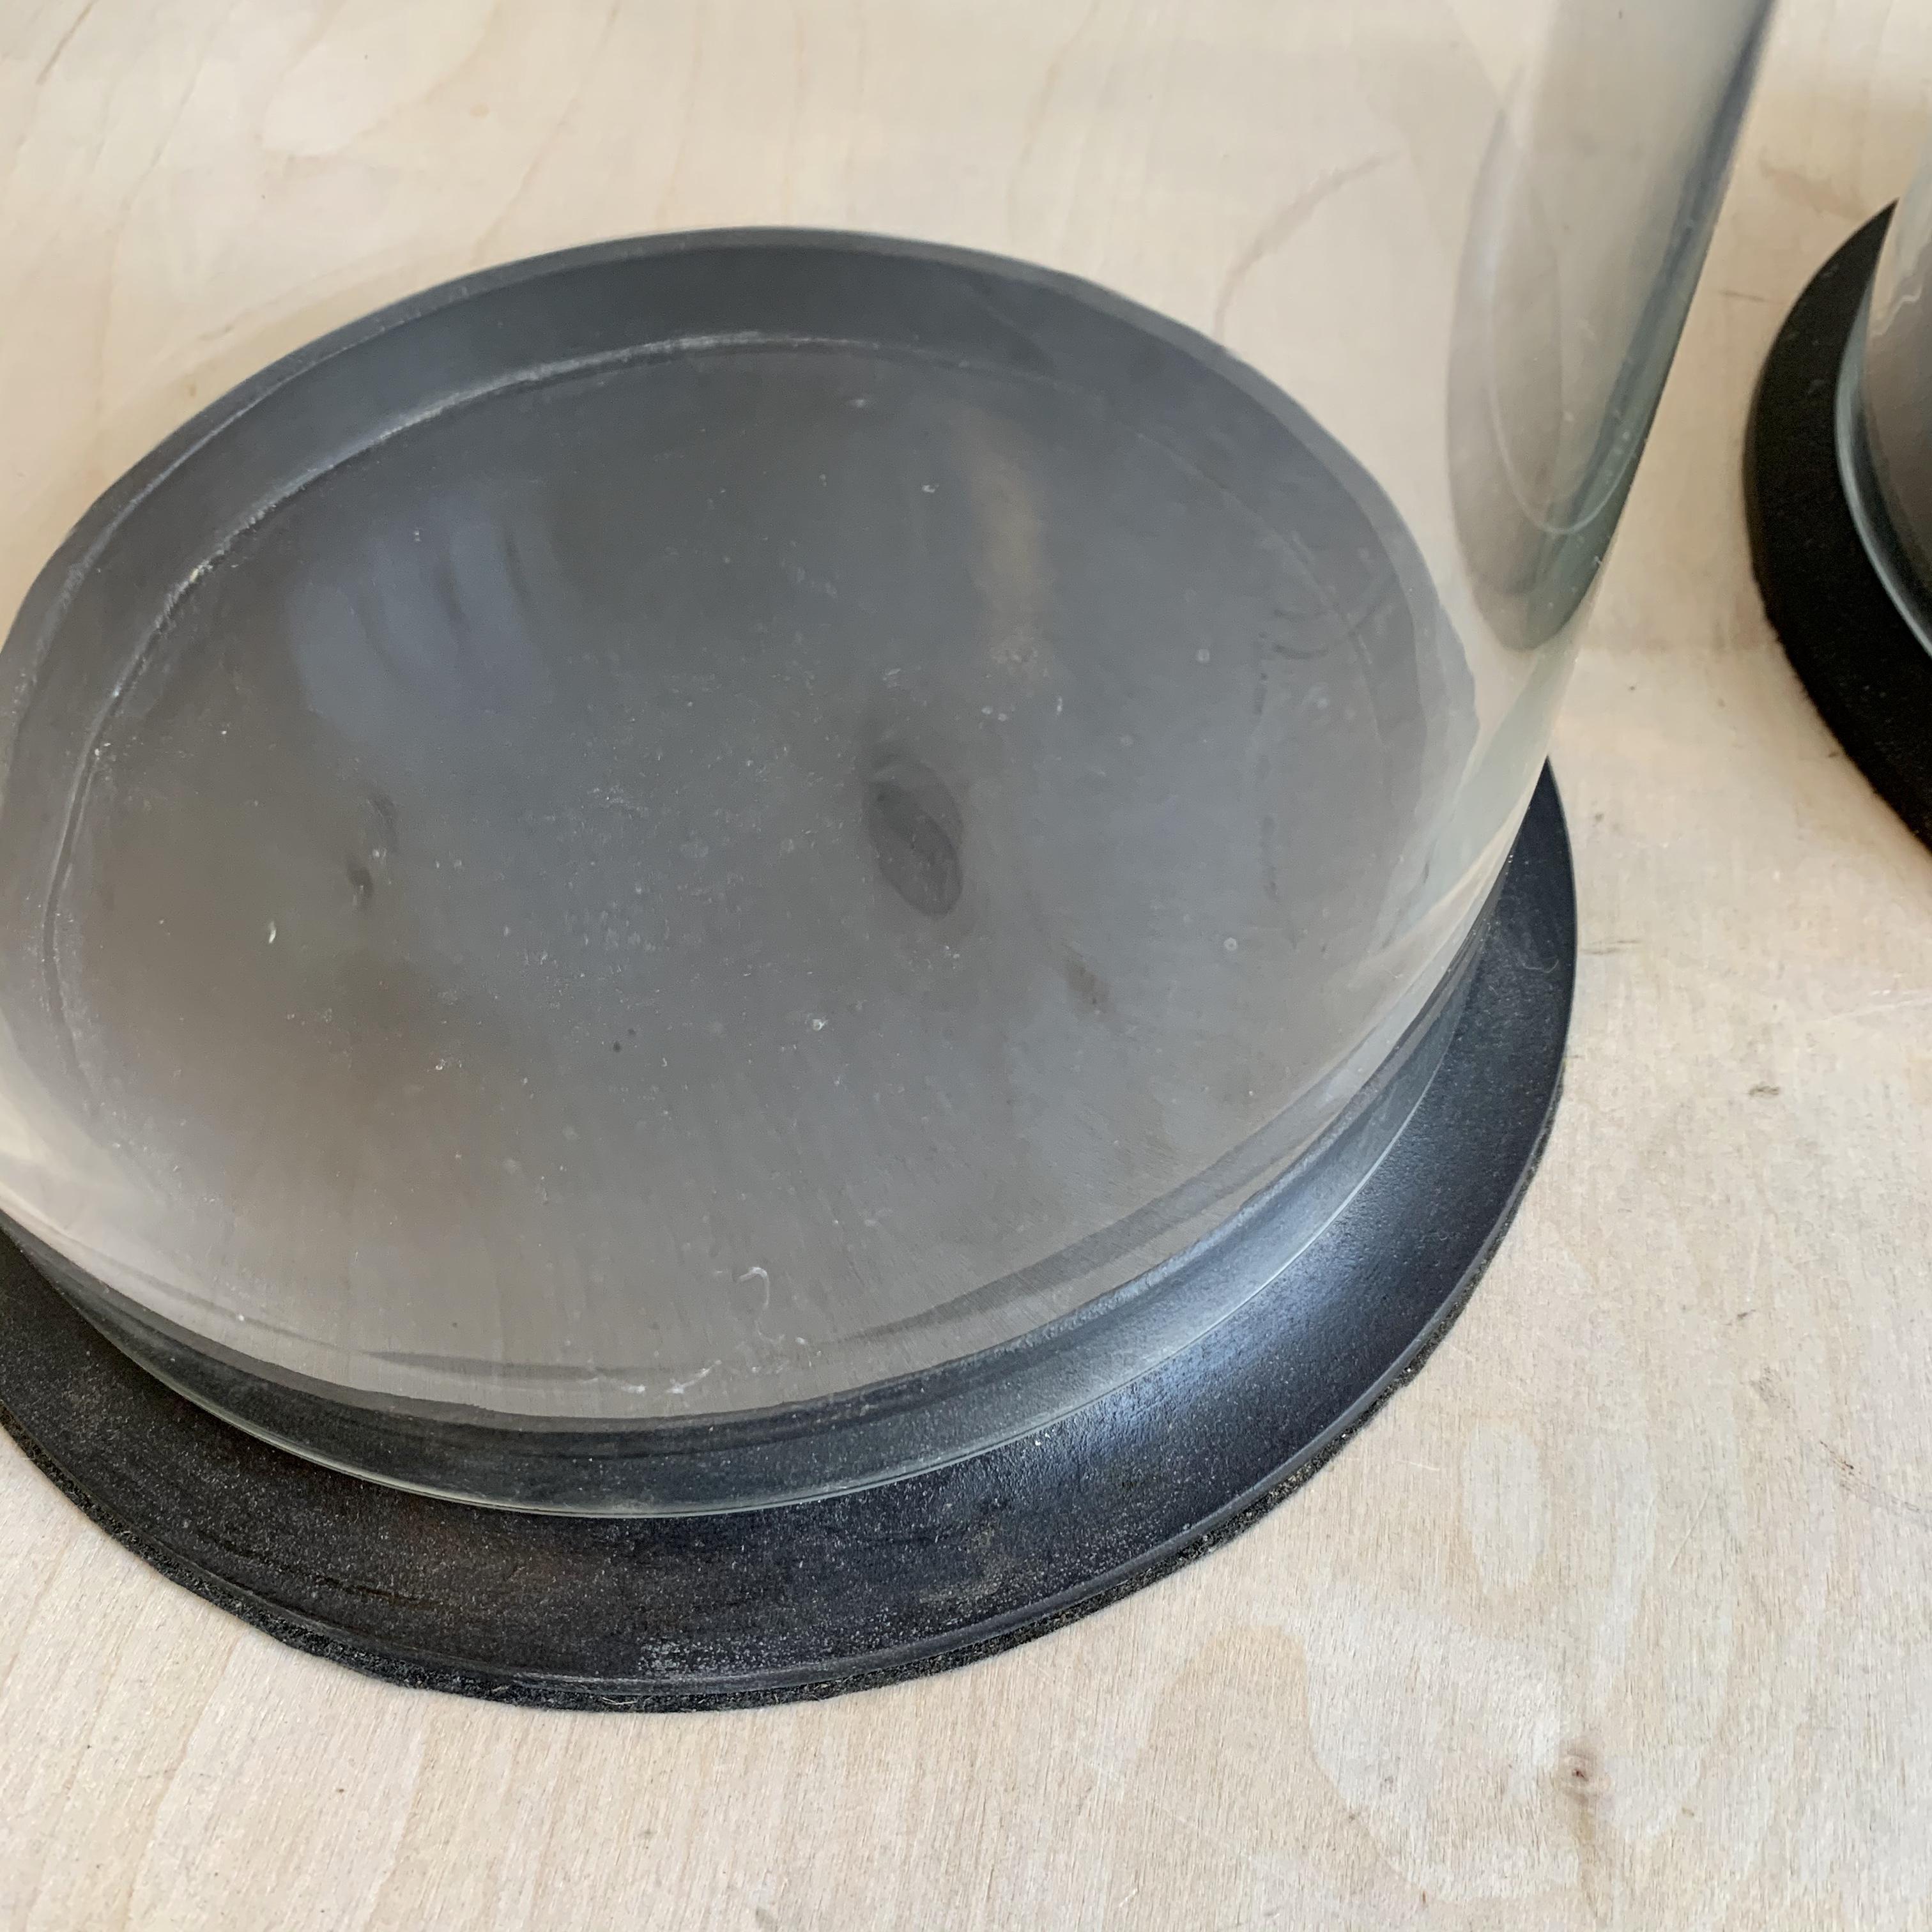 2 large glass domes on metal bases. Measures: 8